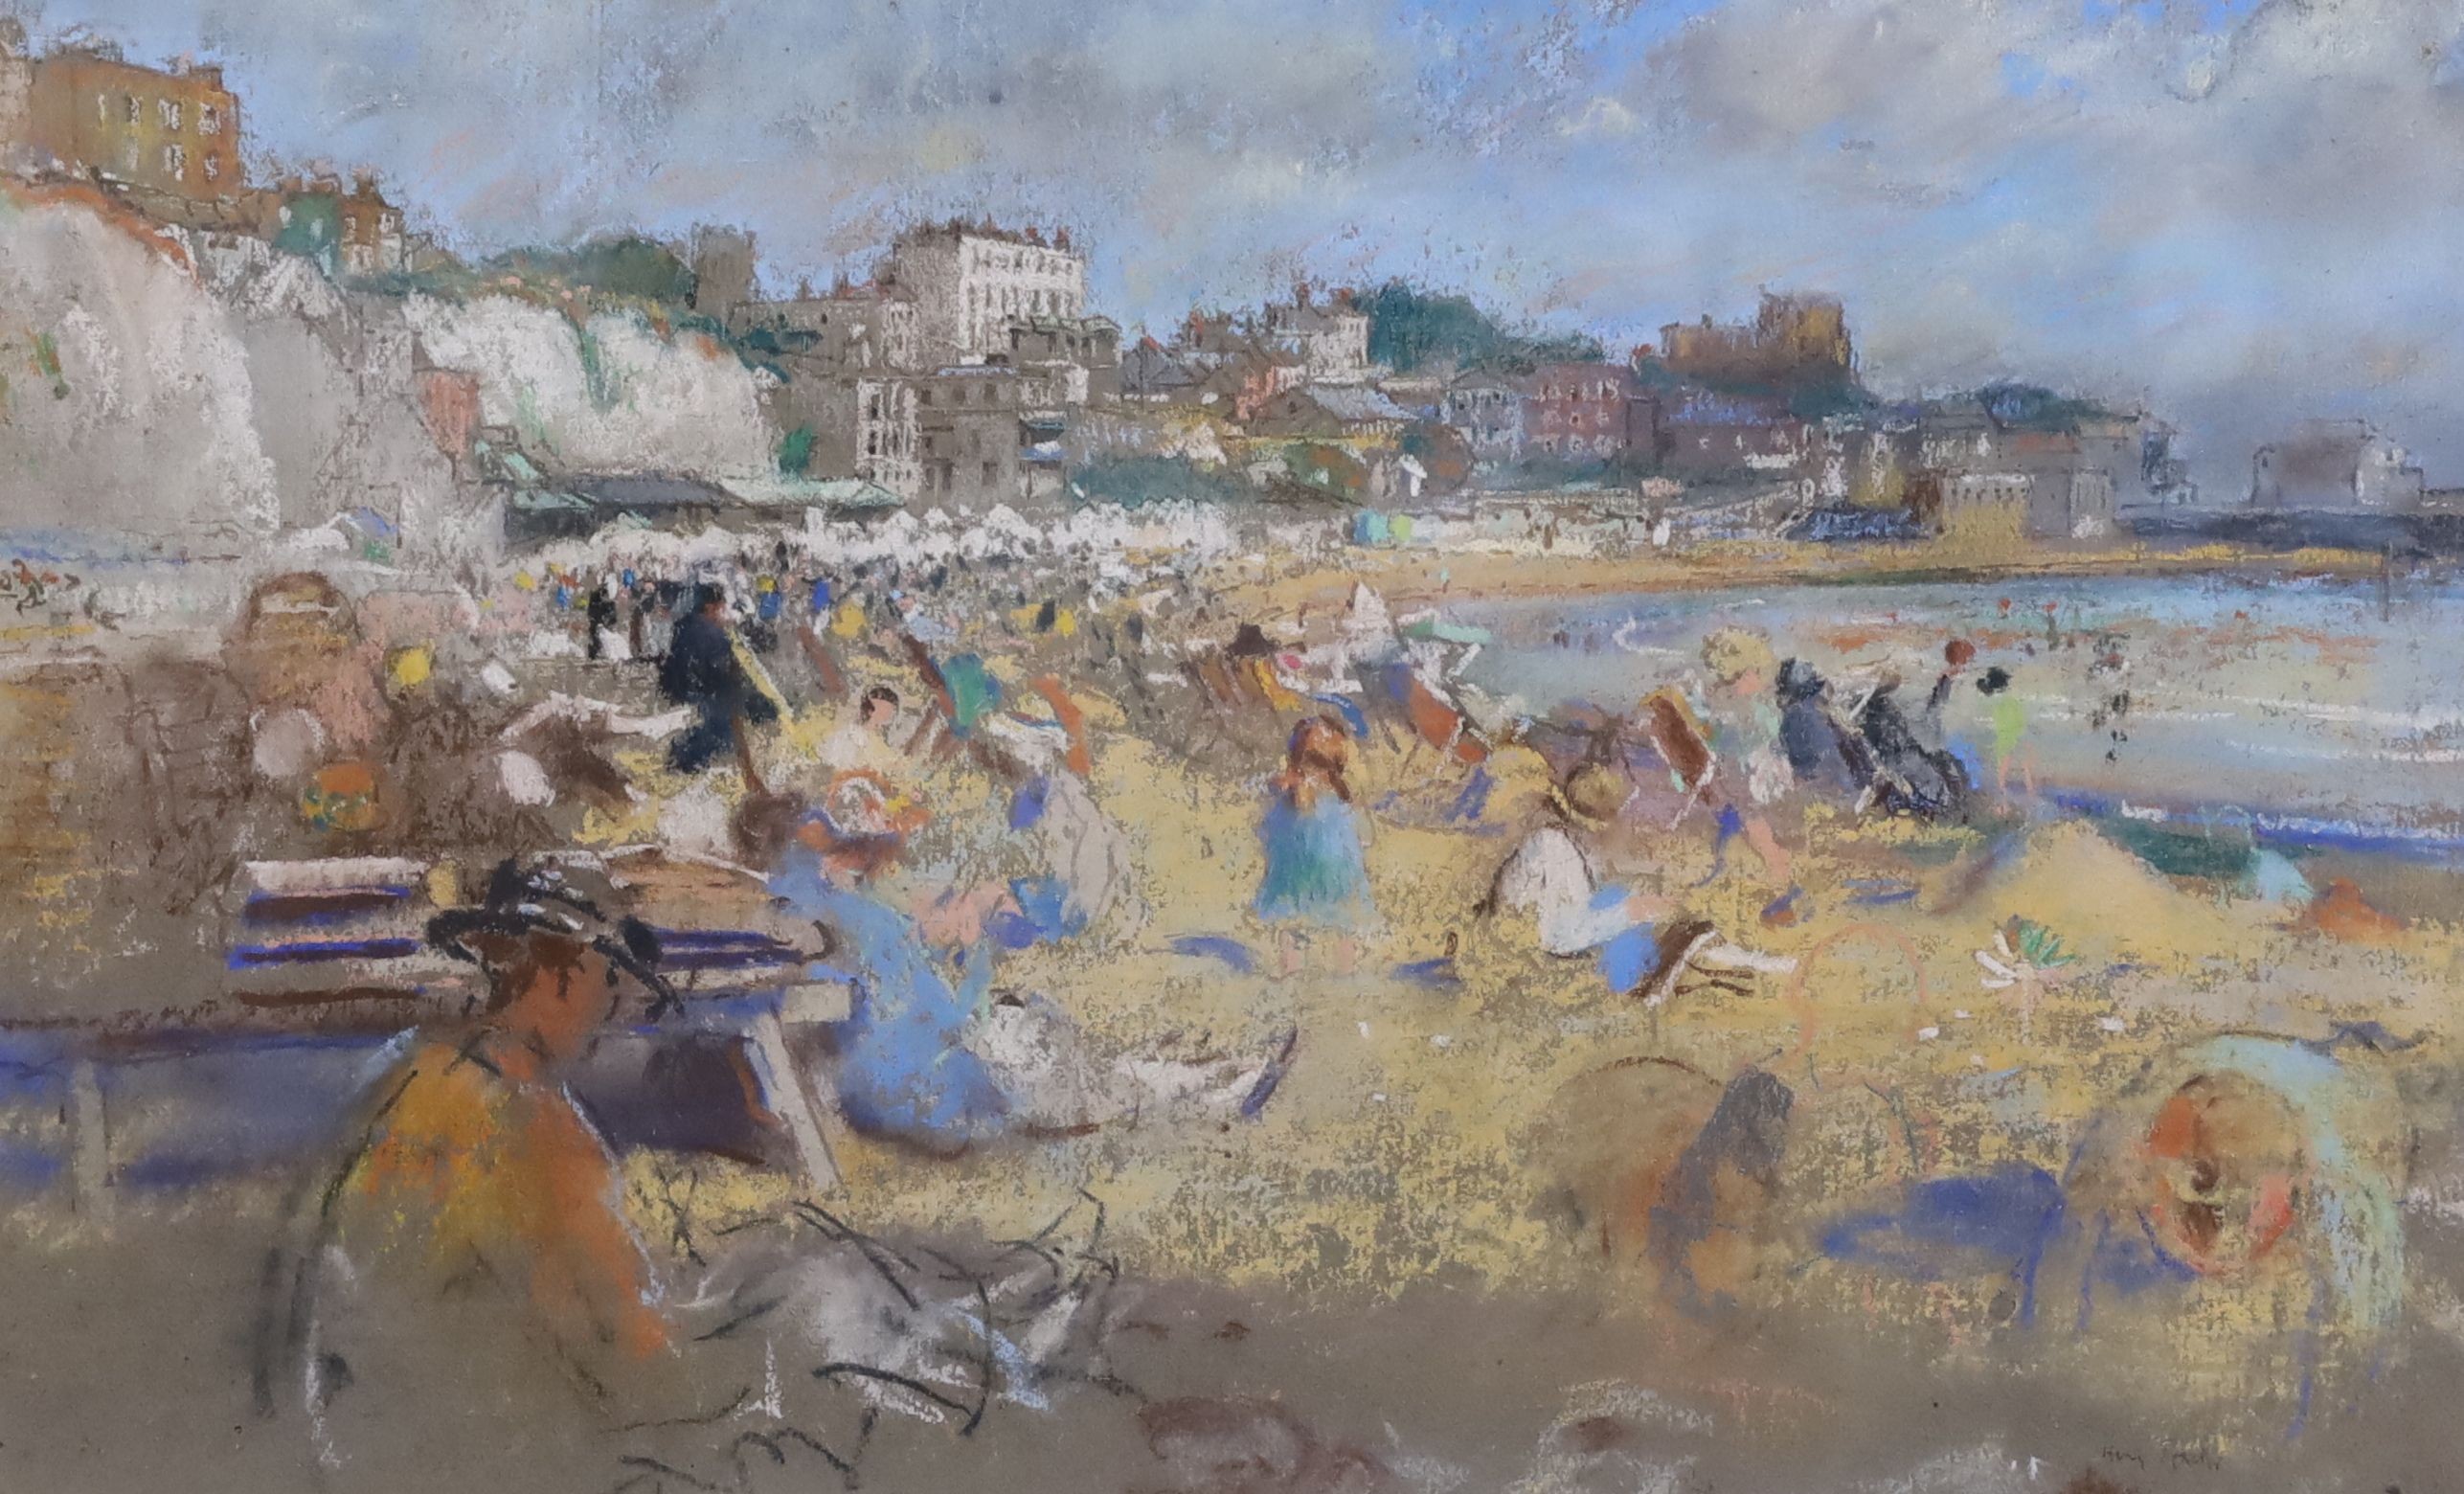 Henry Tonks (1862-1937), 'Broadstairs', pastel and watercolour on paper, 27 x 43.5cm